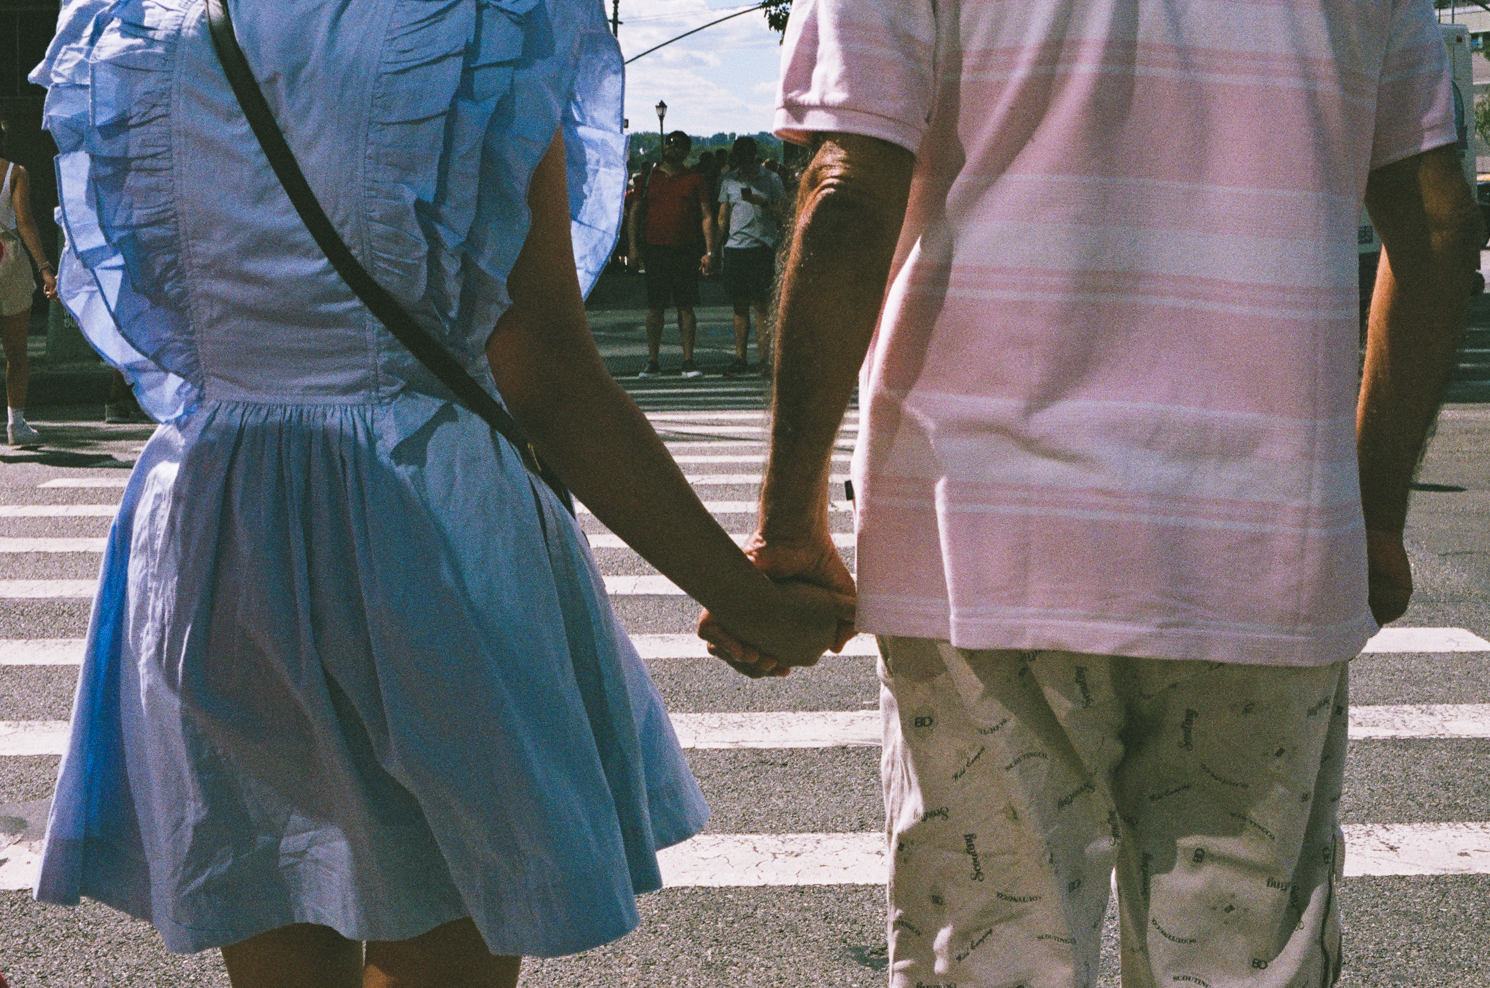 A woman in a light blue dress and a man in a pink, striped shirt holding hands at an intersection.